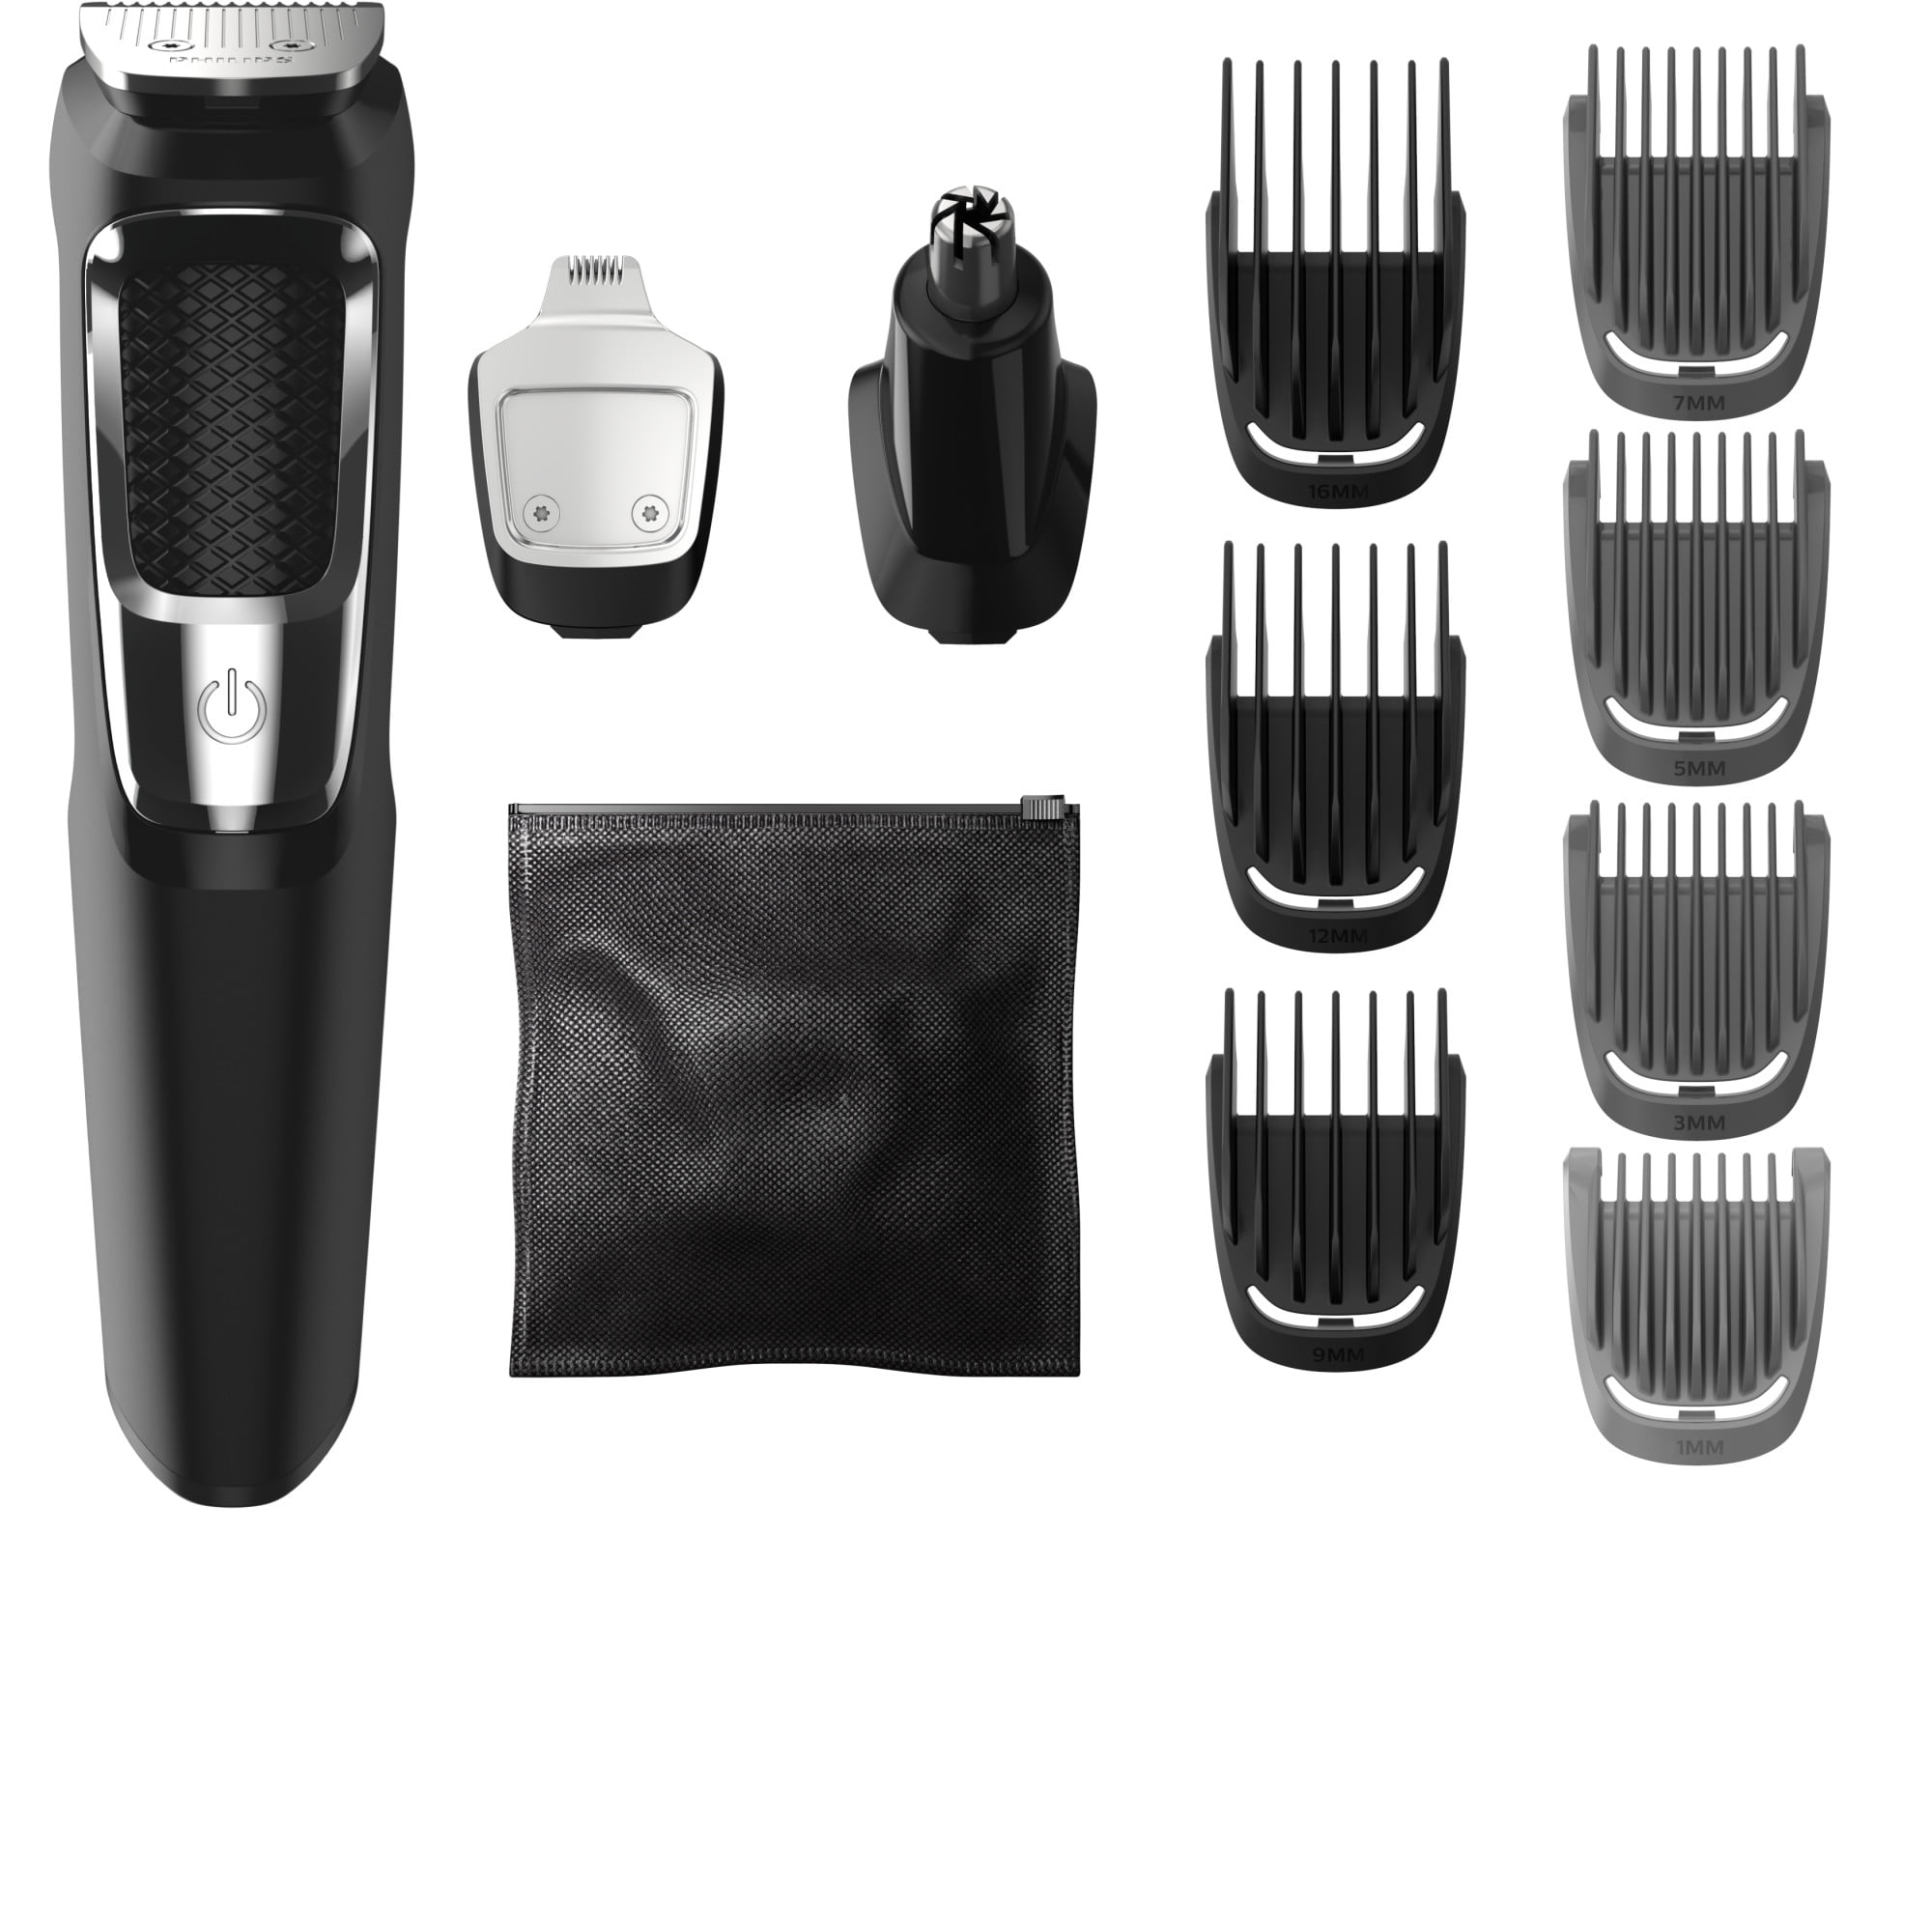 Philips Norelco Multi Groomer - 13 Piece Mens Grooming Kit For Beard, Face,  Nose, and Ear Hair Trimmer and Hair Clipper - No Blade Oil Needed,  MG3750/60 